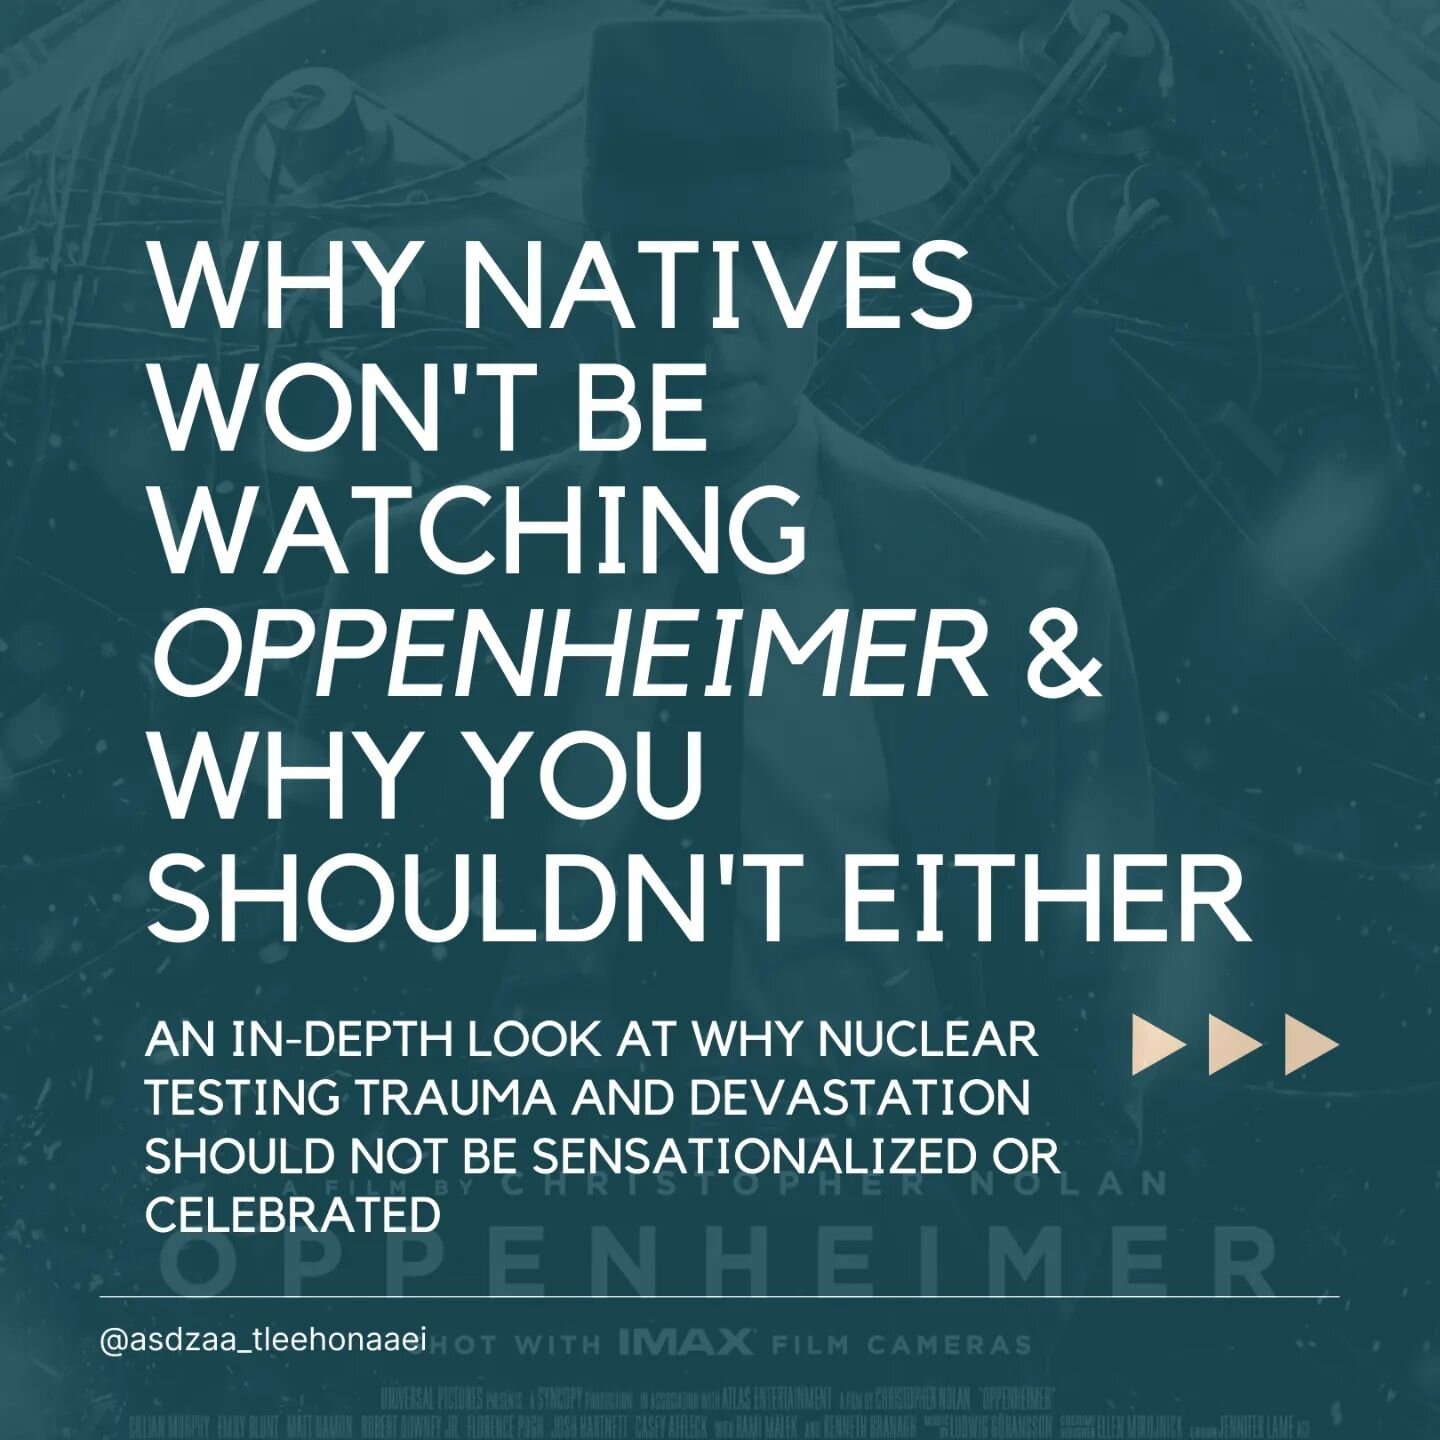 #BoycottOppenheimer

WHY NATIVES WON'T BE WATCHING OPPENHEIMER &amp; WHY YOU SHOULDN'T EITHER. 
An in-depth look at why nuclear testing trauma and devastation should not be sensationalized or celebrated.

AUTHOR'S NOTE:
After much request from my com